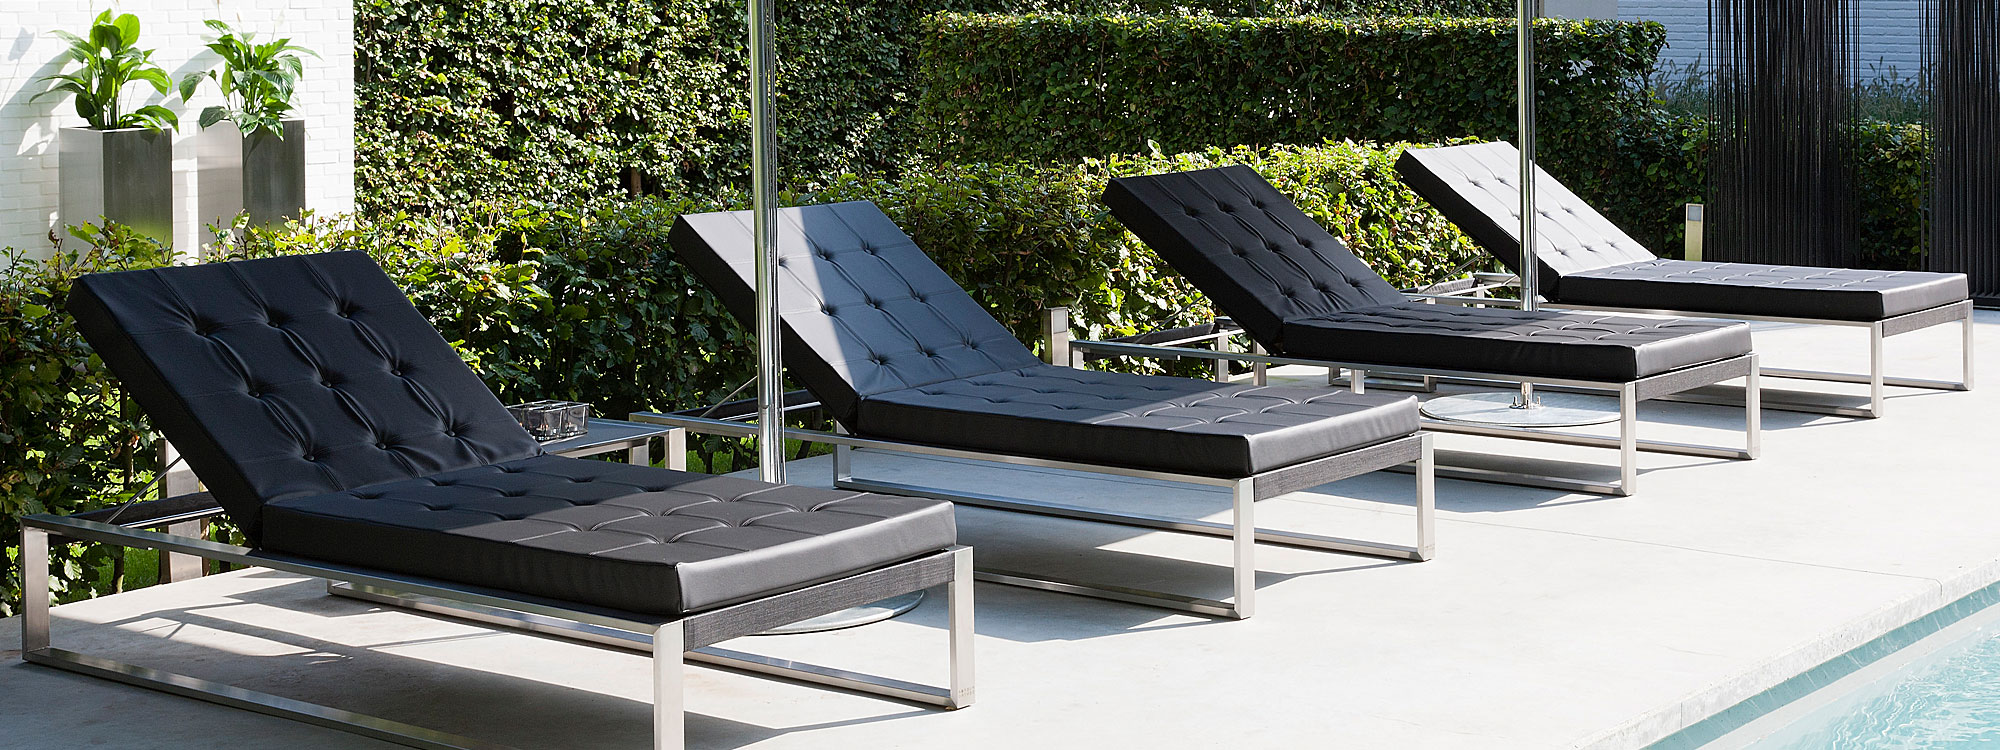 Image of row of 4 Siesta minimalist sun loungers with brushed stainless steel frames, black Batyline seat and back and black Stamskin cushions